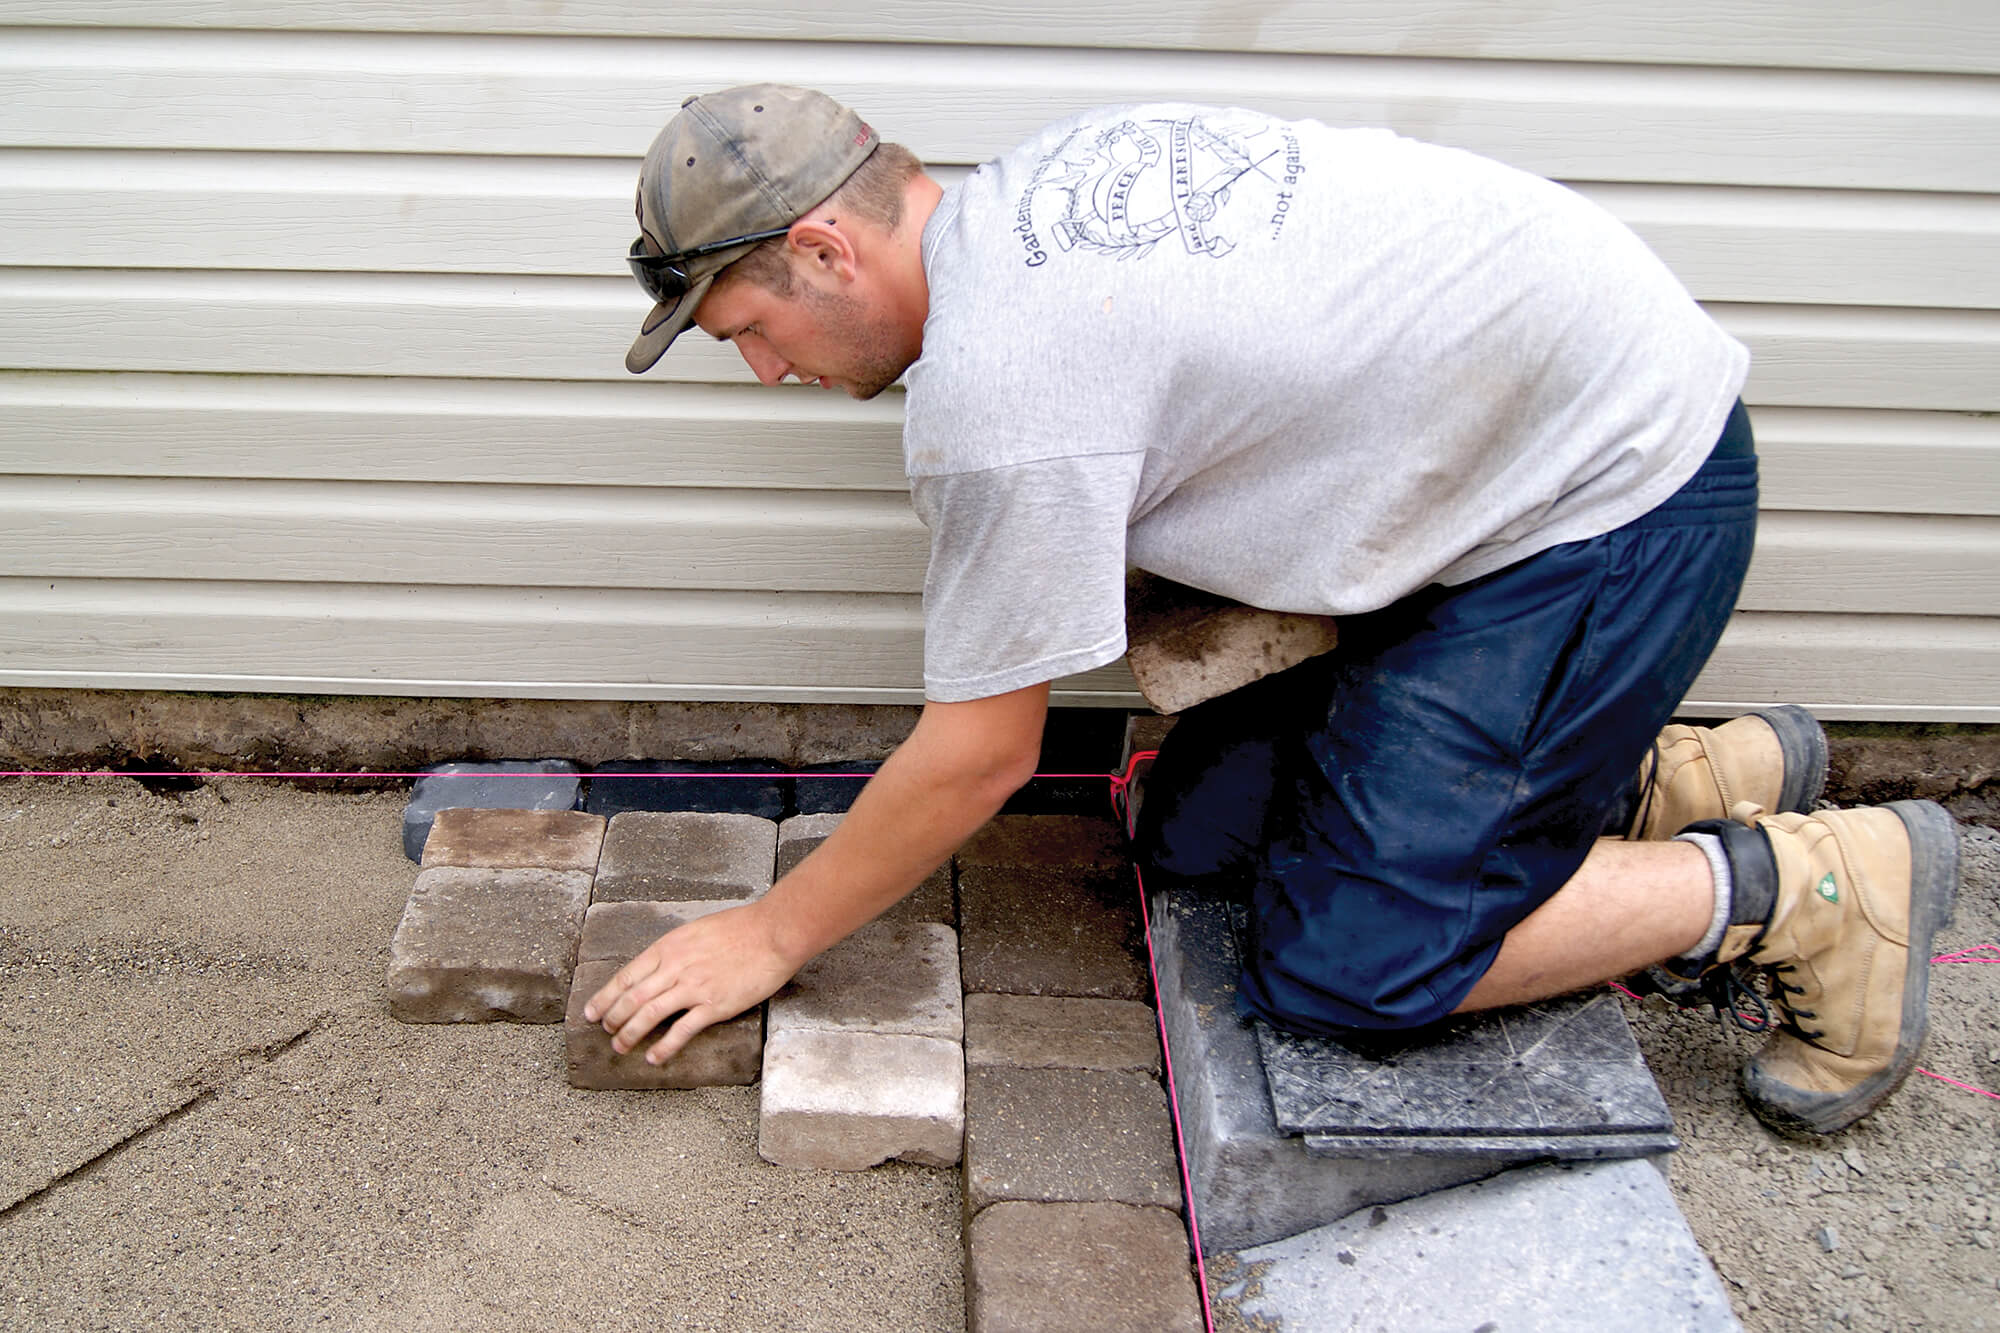 man laving pavers at the side of a house